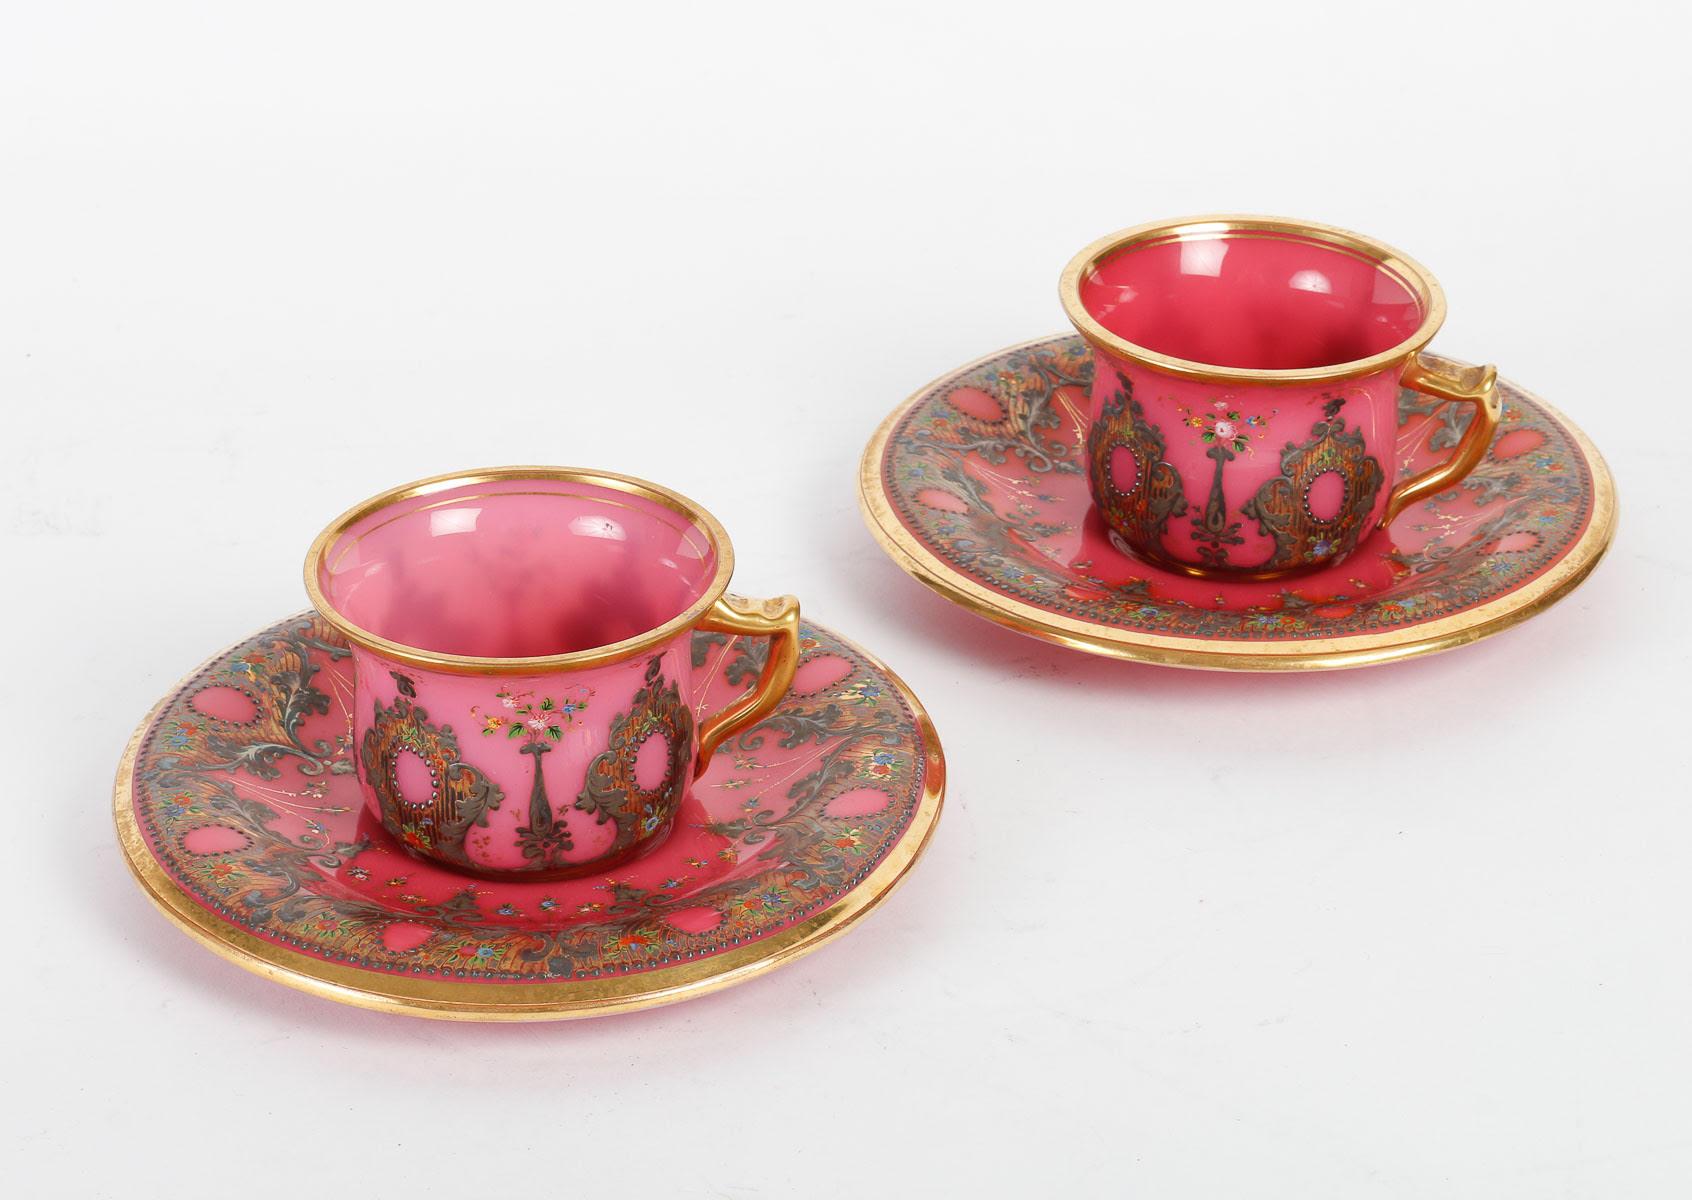 White and Pink Opaline Service Enamelled with Silver and Gold, 19th Century. 7